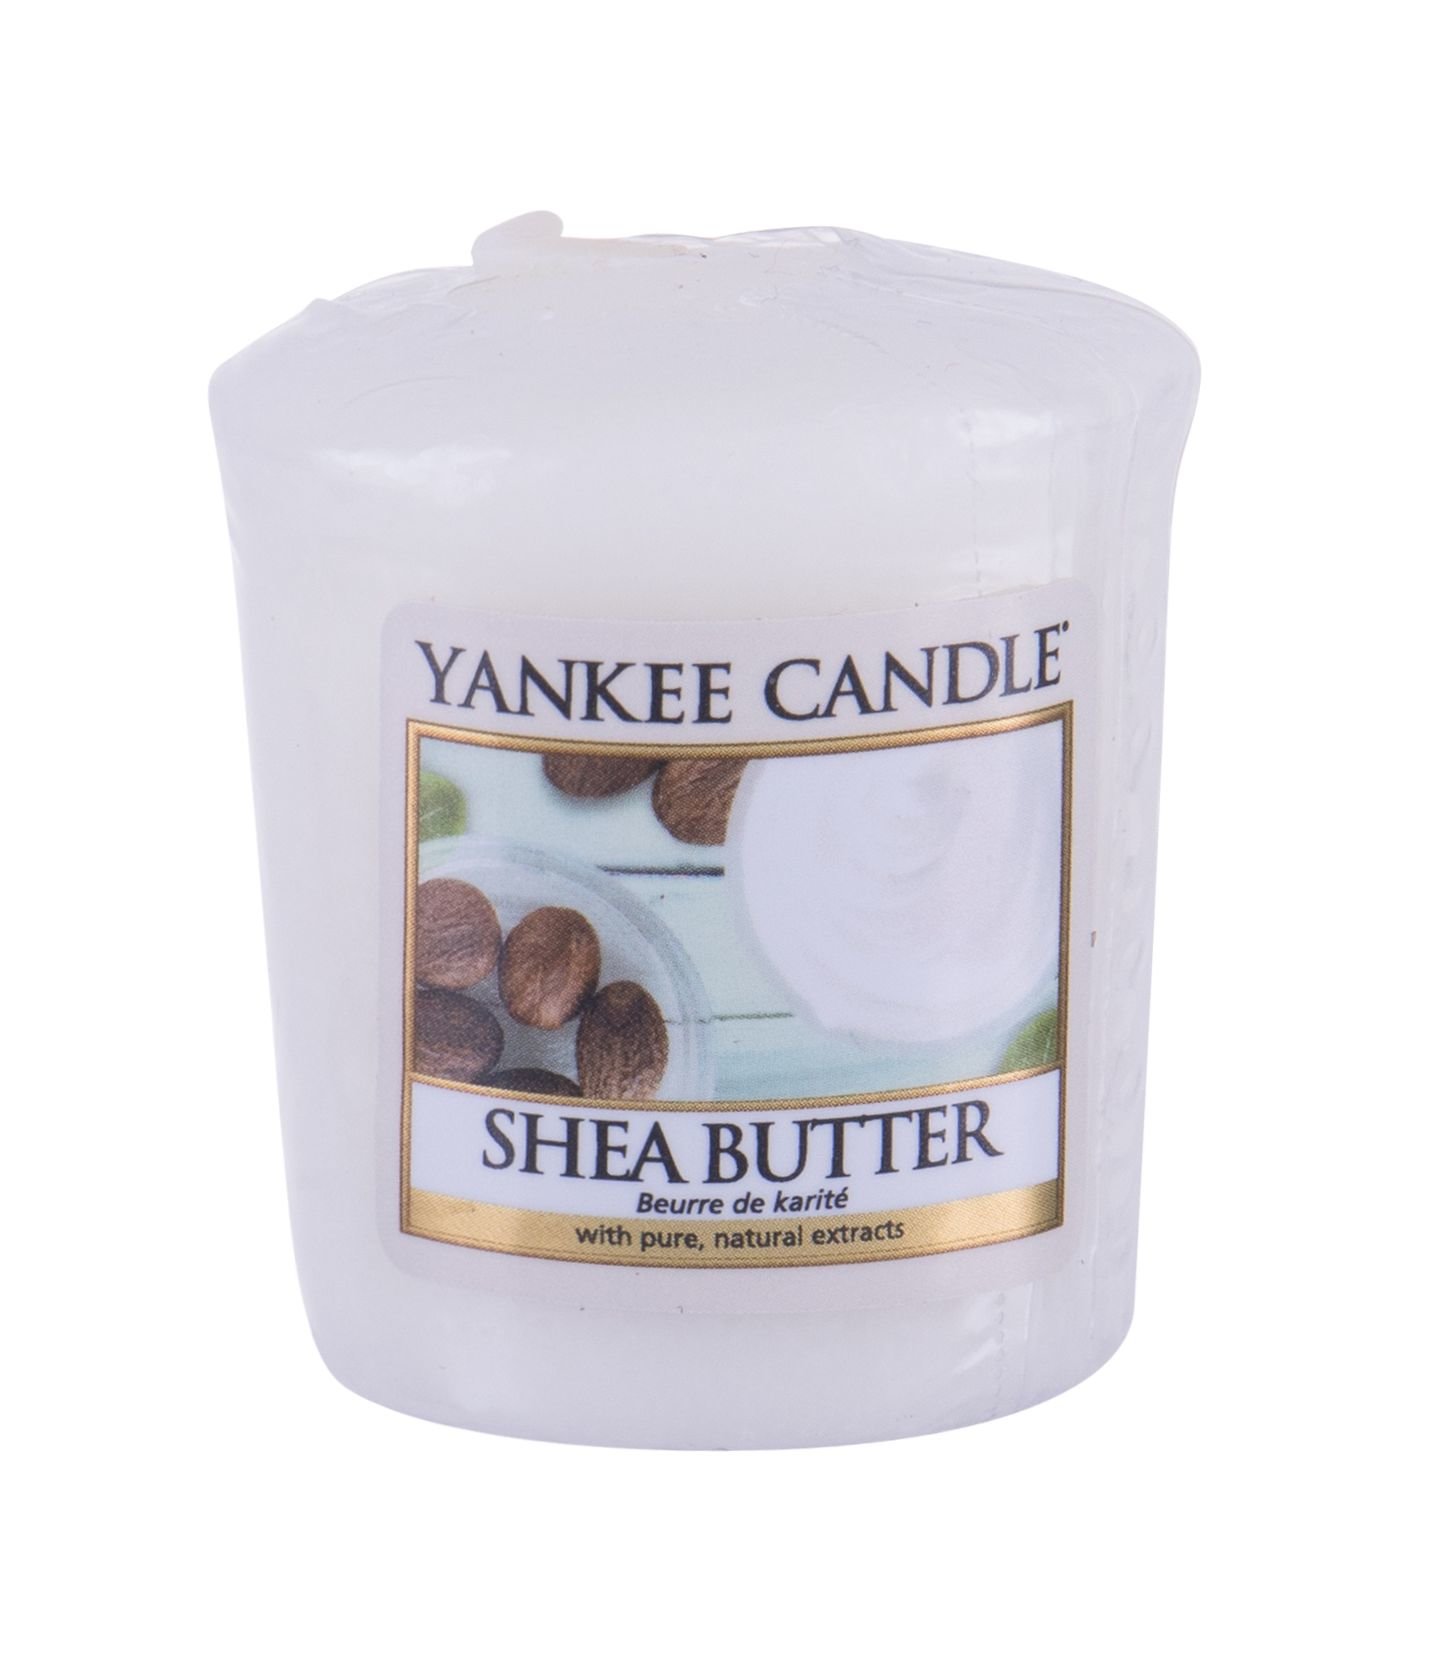 Yankee Candle Shea Butter 49g Kvepalai Unisex Scented Candle